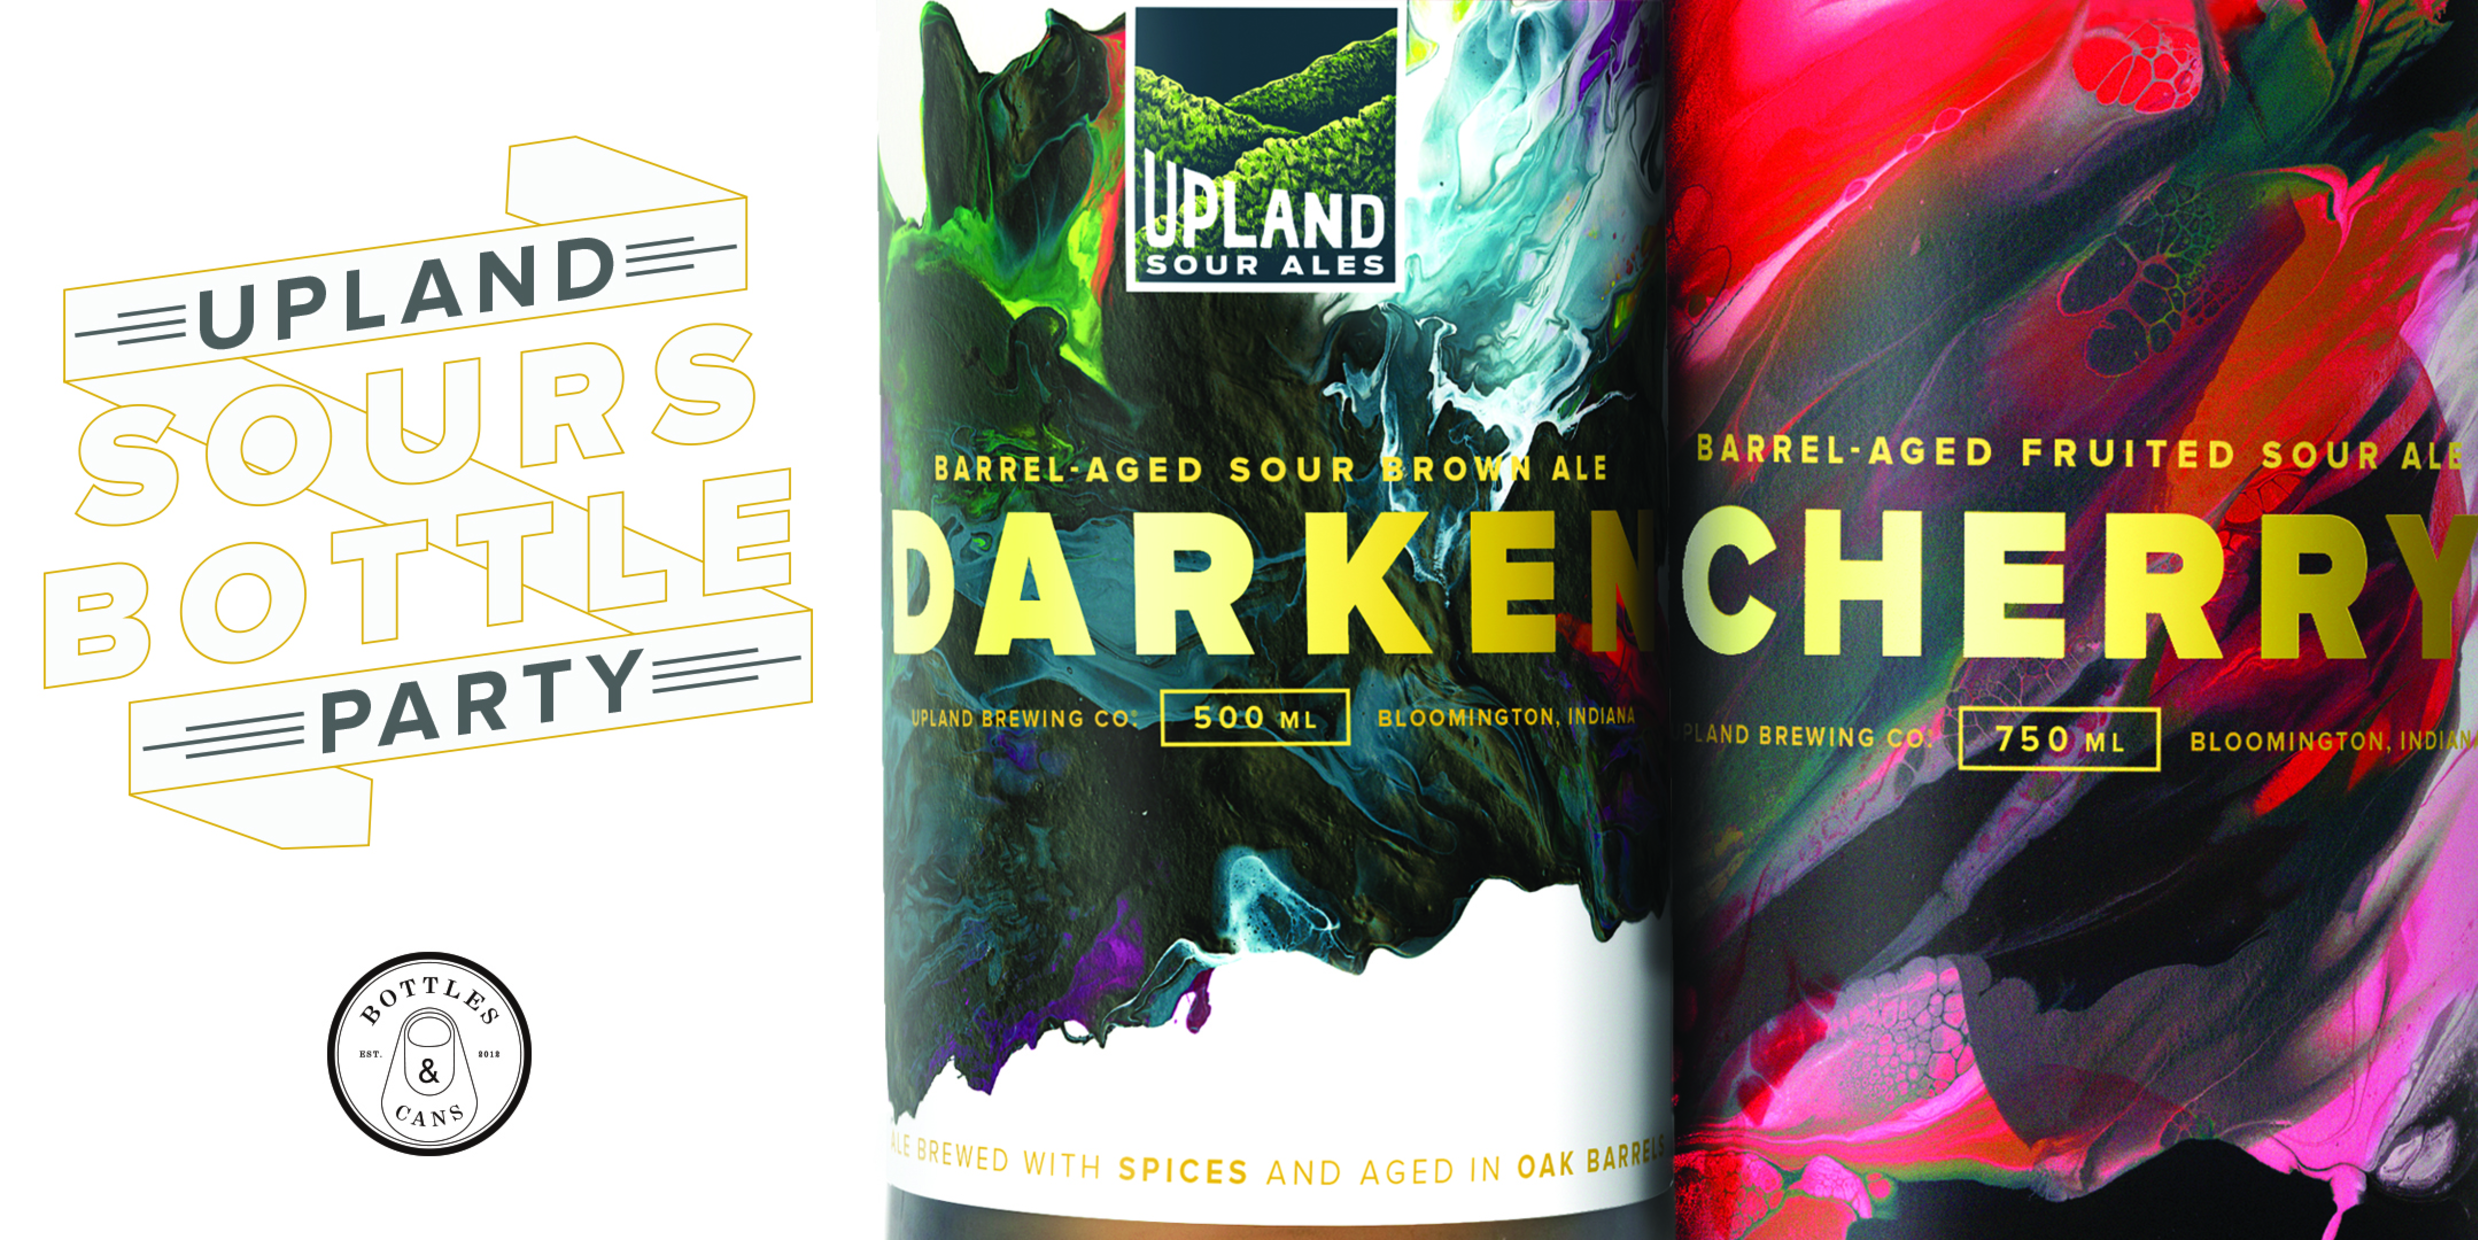 Upland Sours Bottle Party